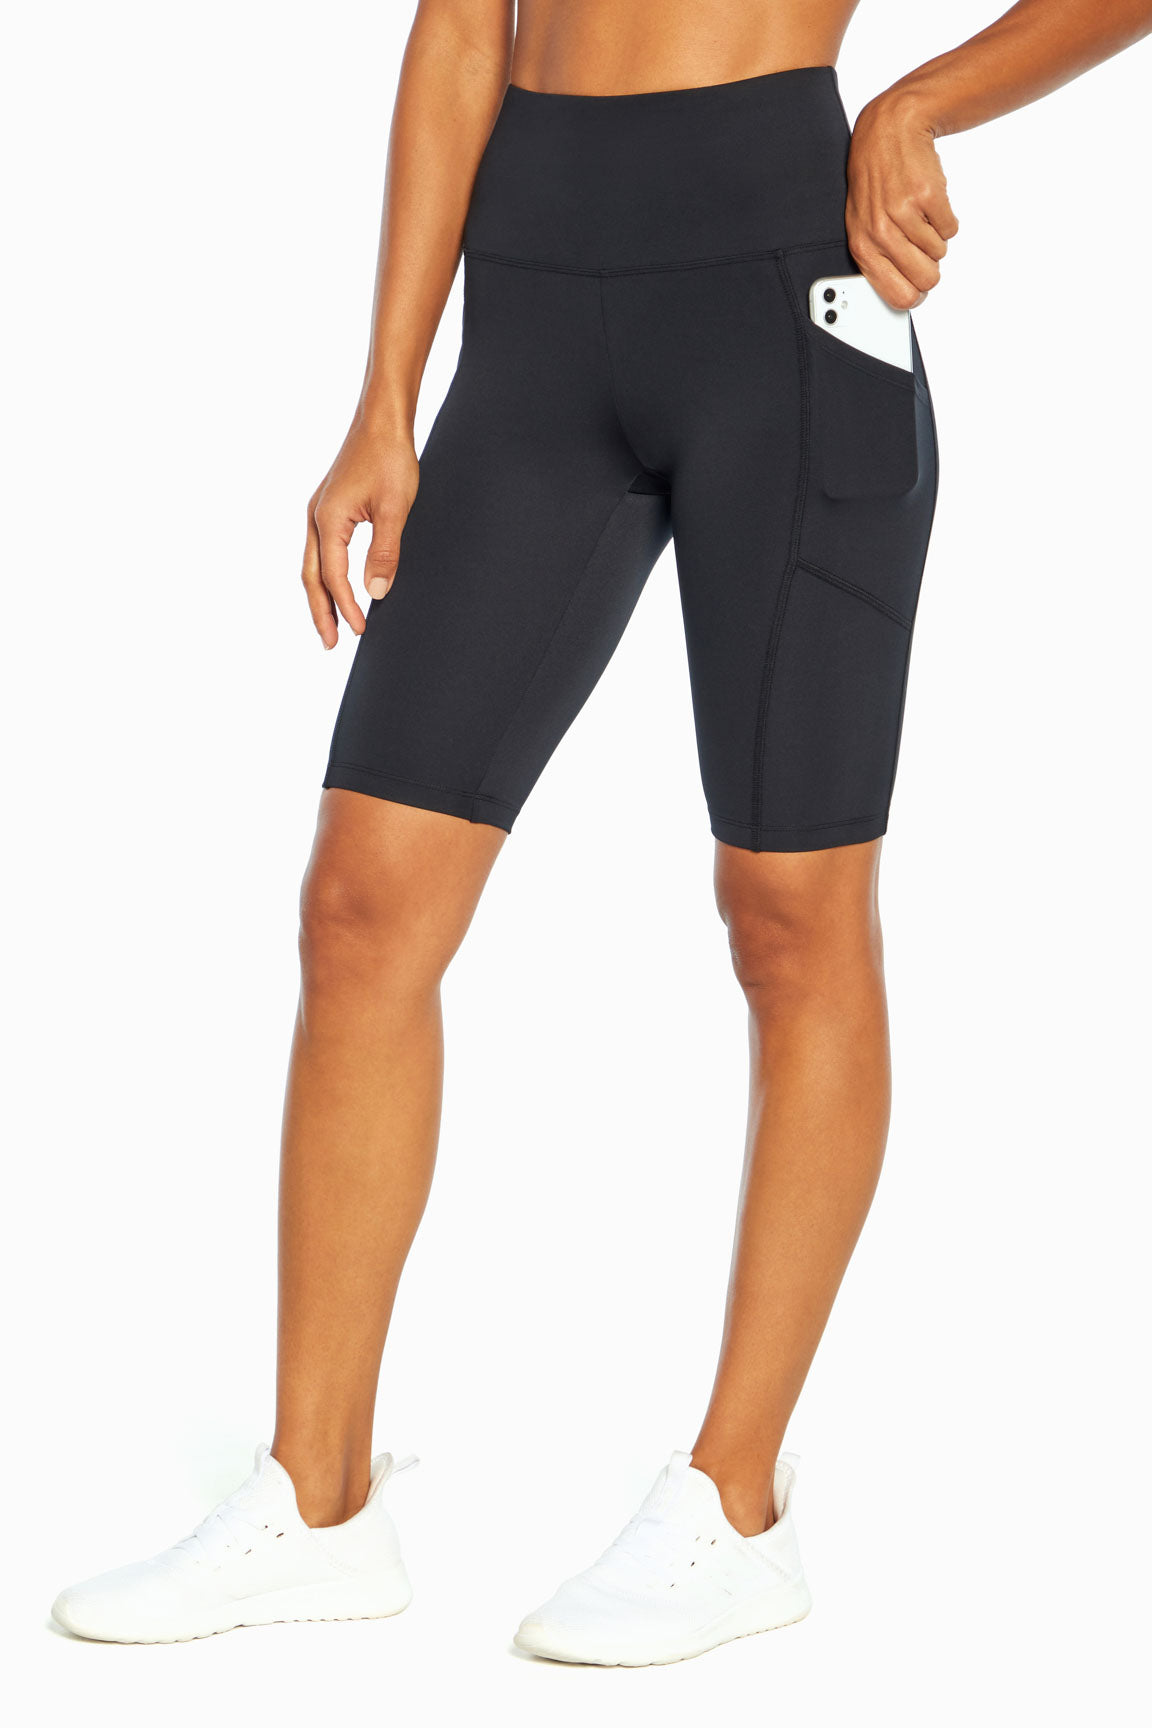 Bally Total Fitness Black Active Pants Size L - 68% off